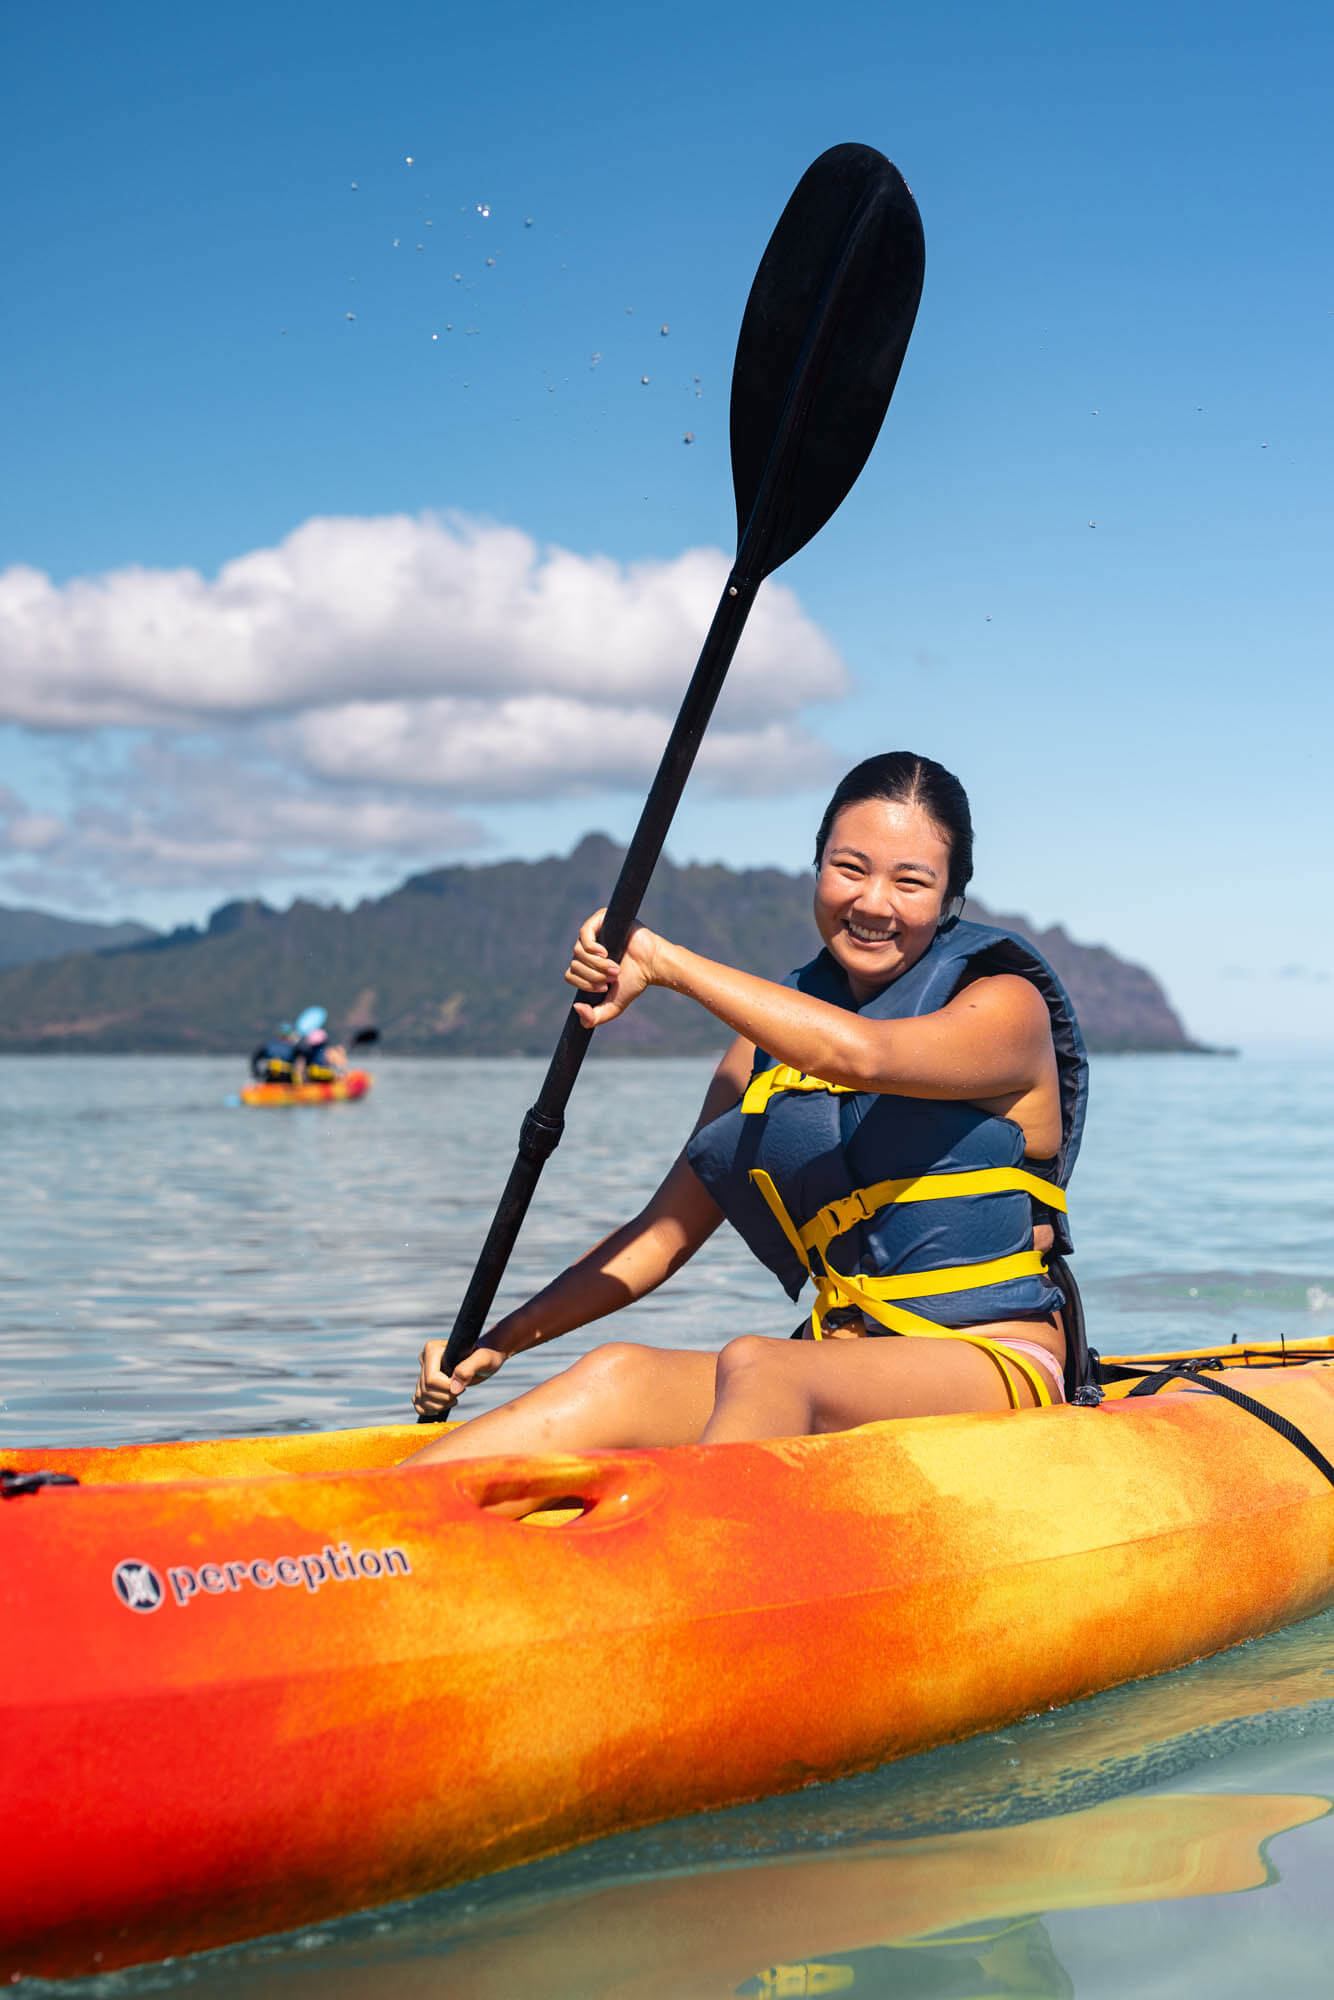 You are currently viewing 5 Reasons Why the Kaneohe Sandbar Should be Your Next Winter Destination